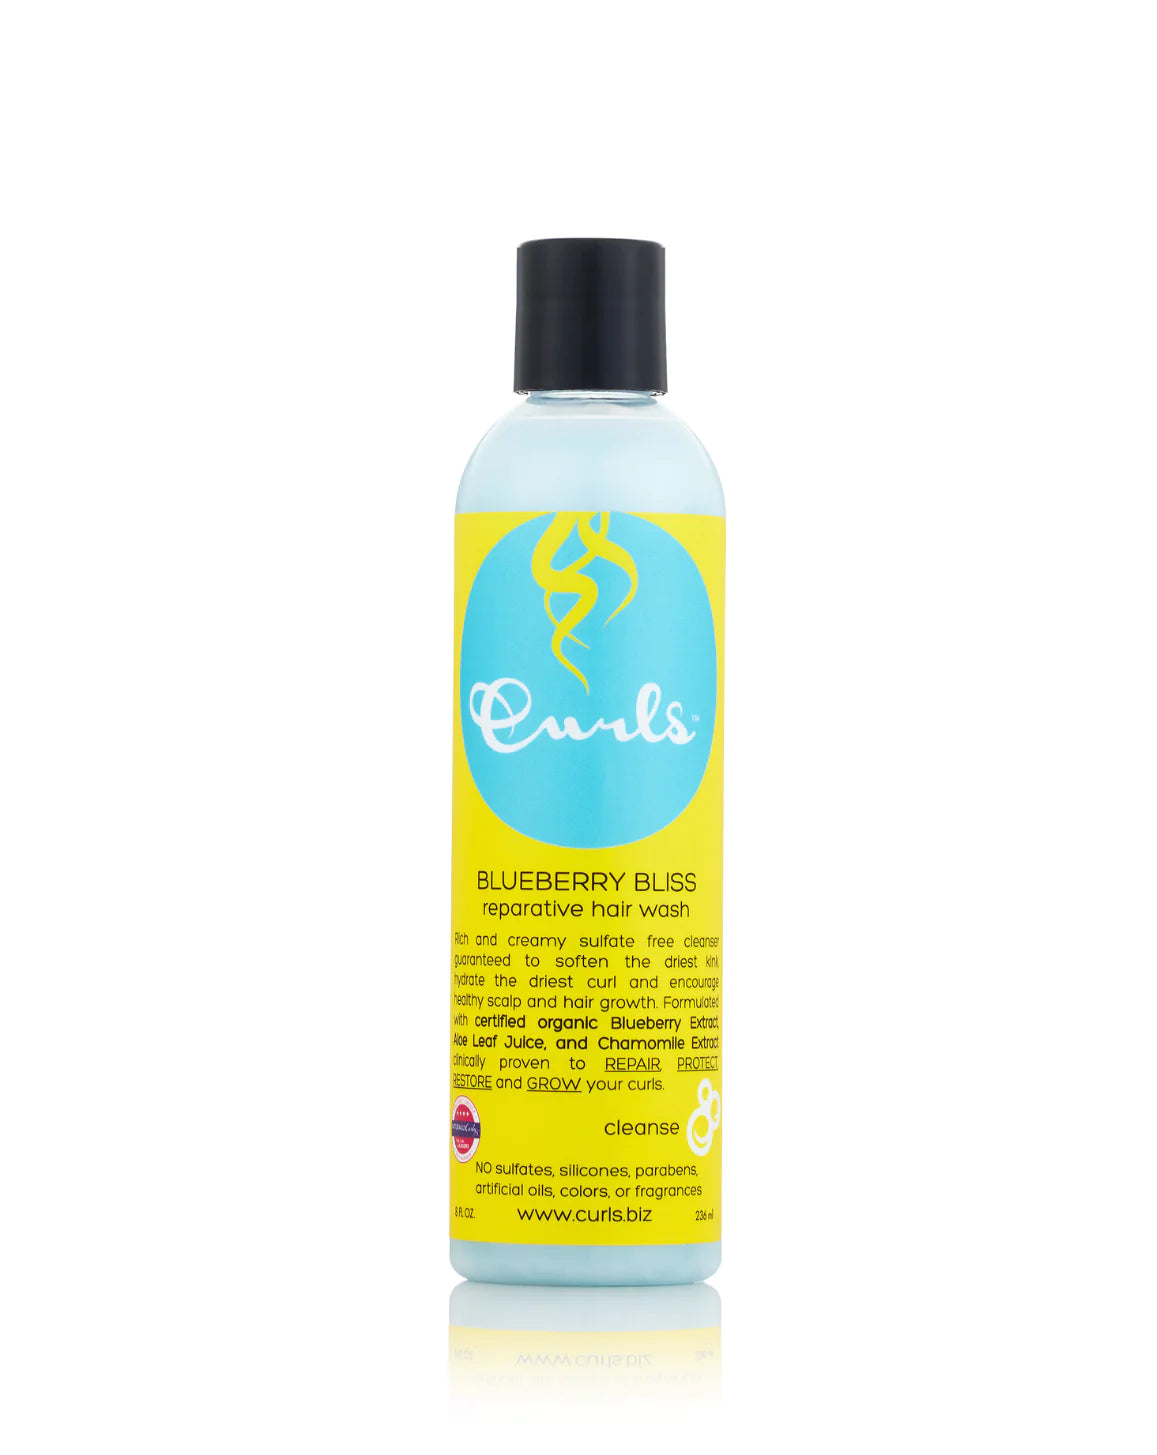 Curls™ Blueberry Bliss Reparative Hair Wash